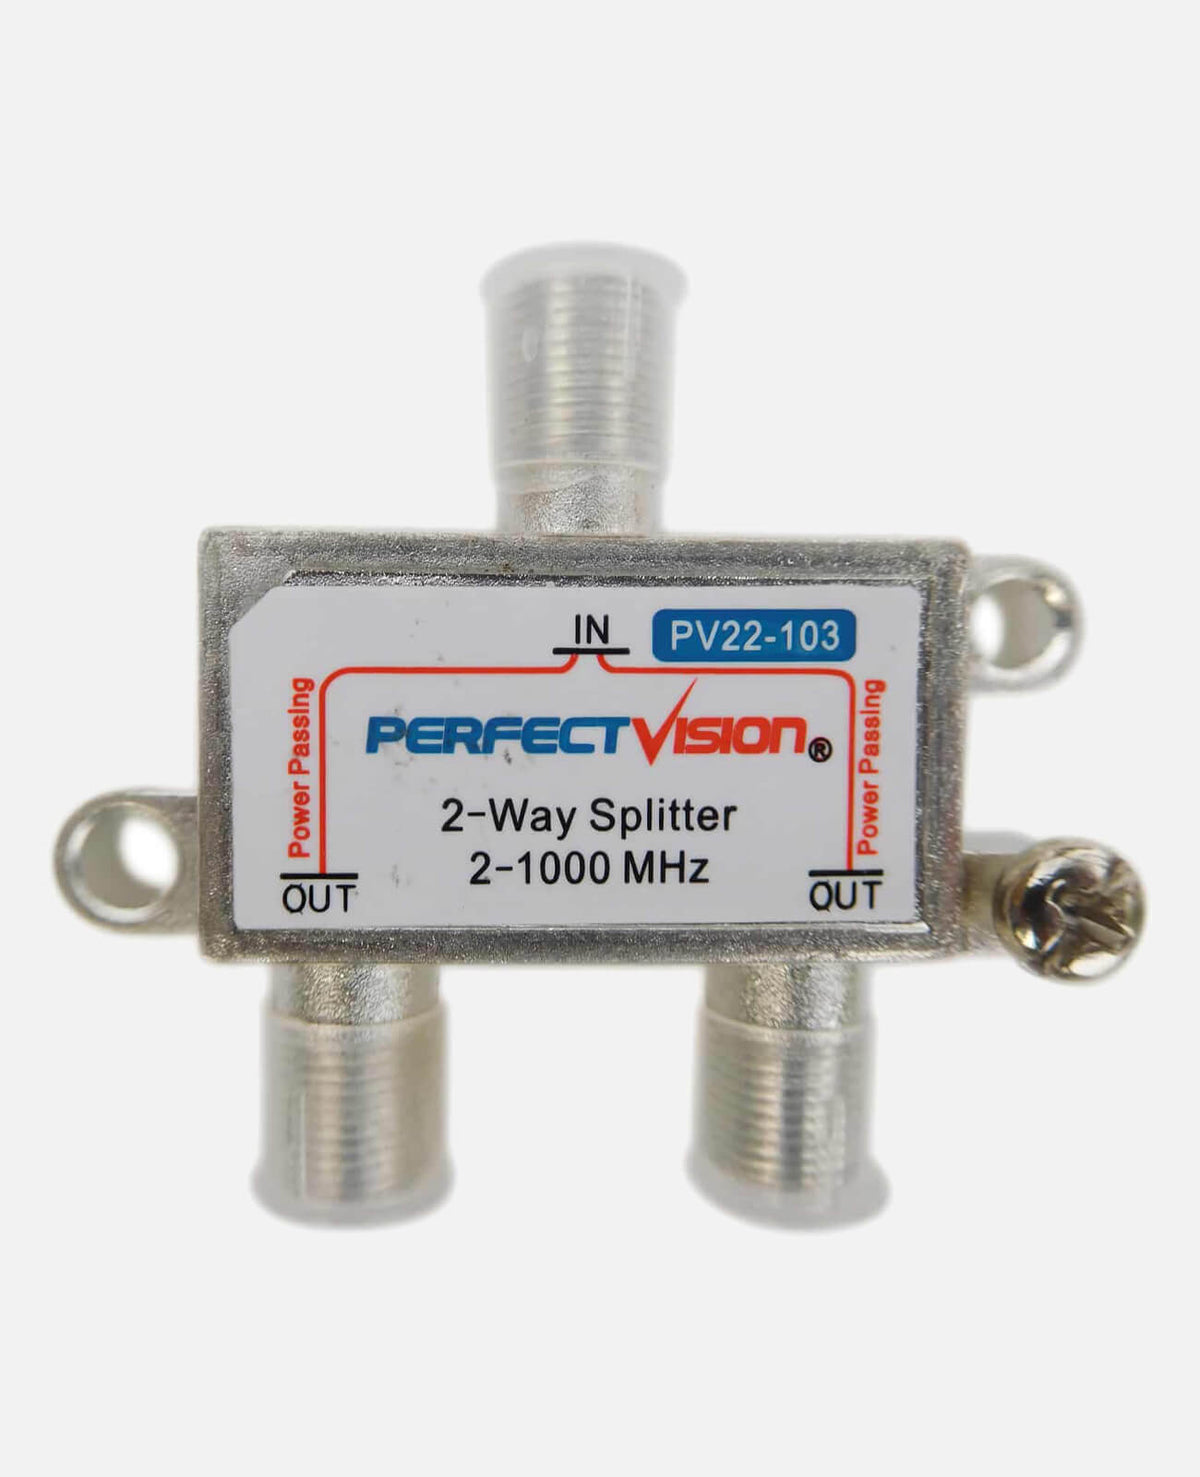 Perfect Vision 2-Way Low Band Splitter 2-1000 Mhz (PV22103)